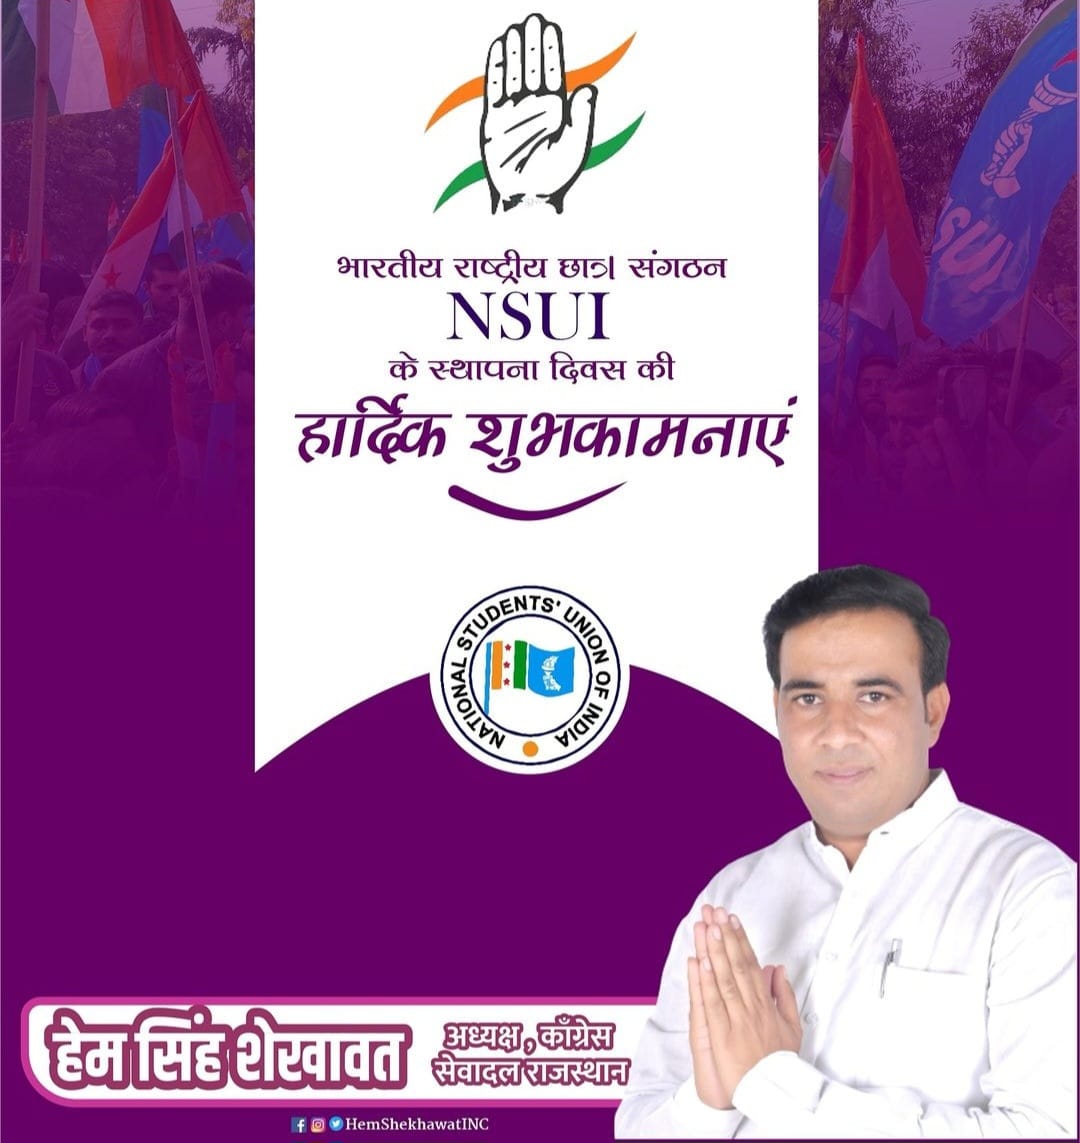 Best wishes to each member of the NSUI on their foundation day. 

#NSUI #NSUIFoundationDay